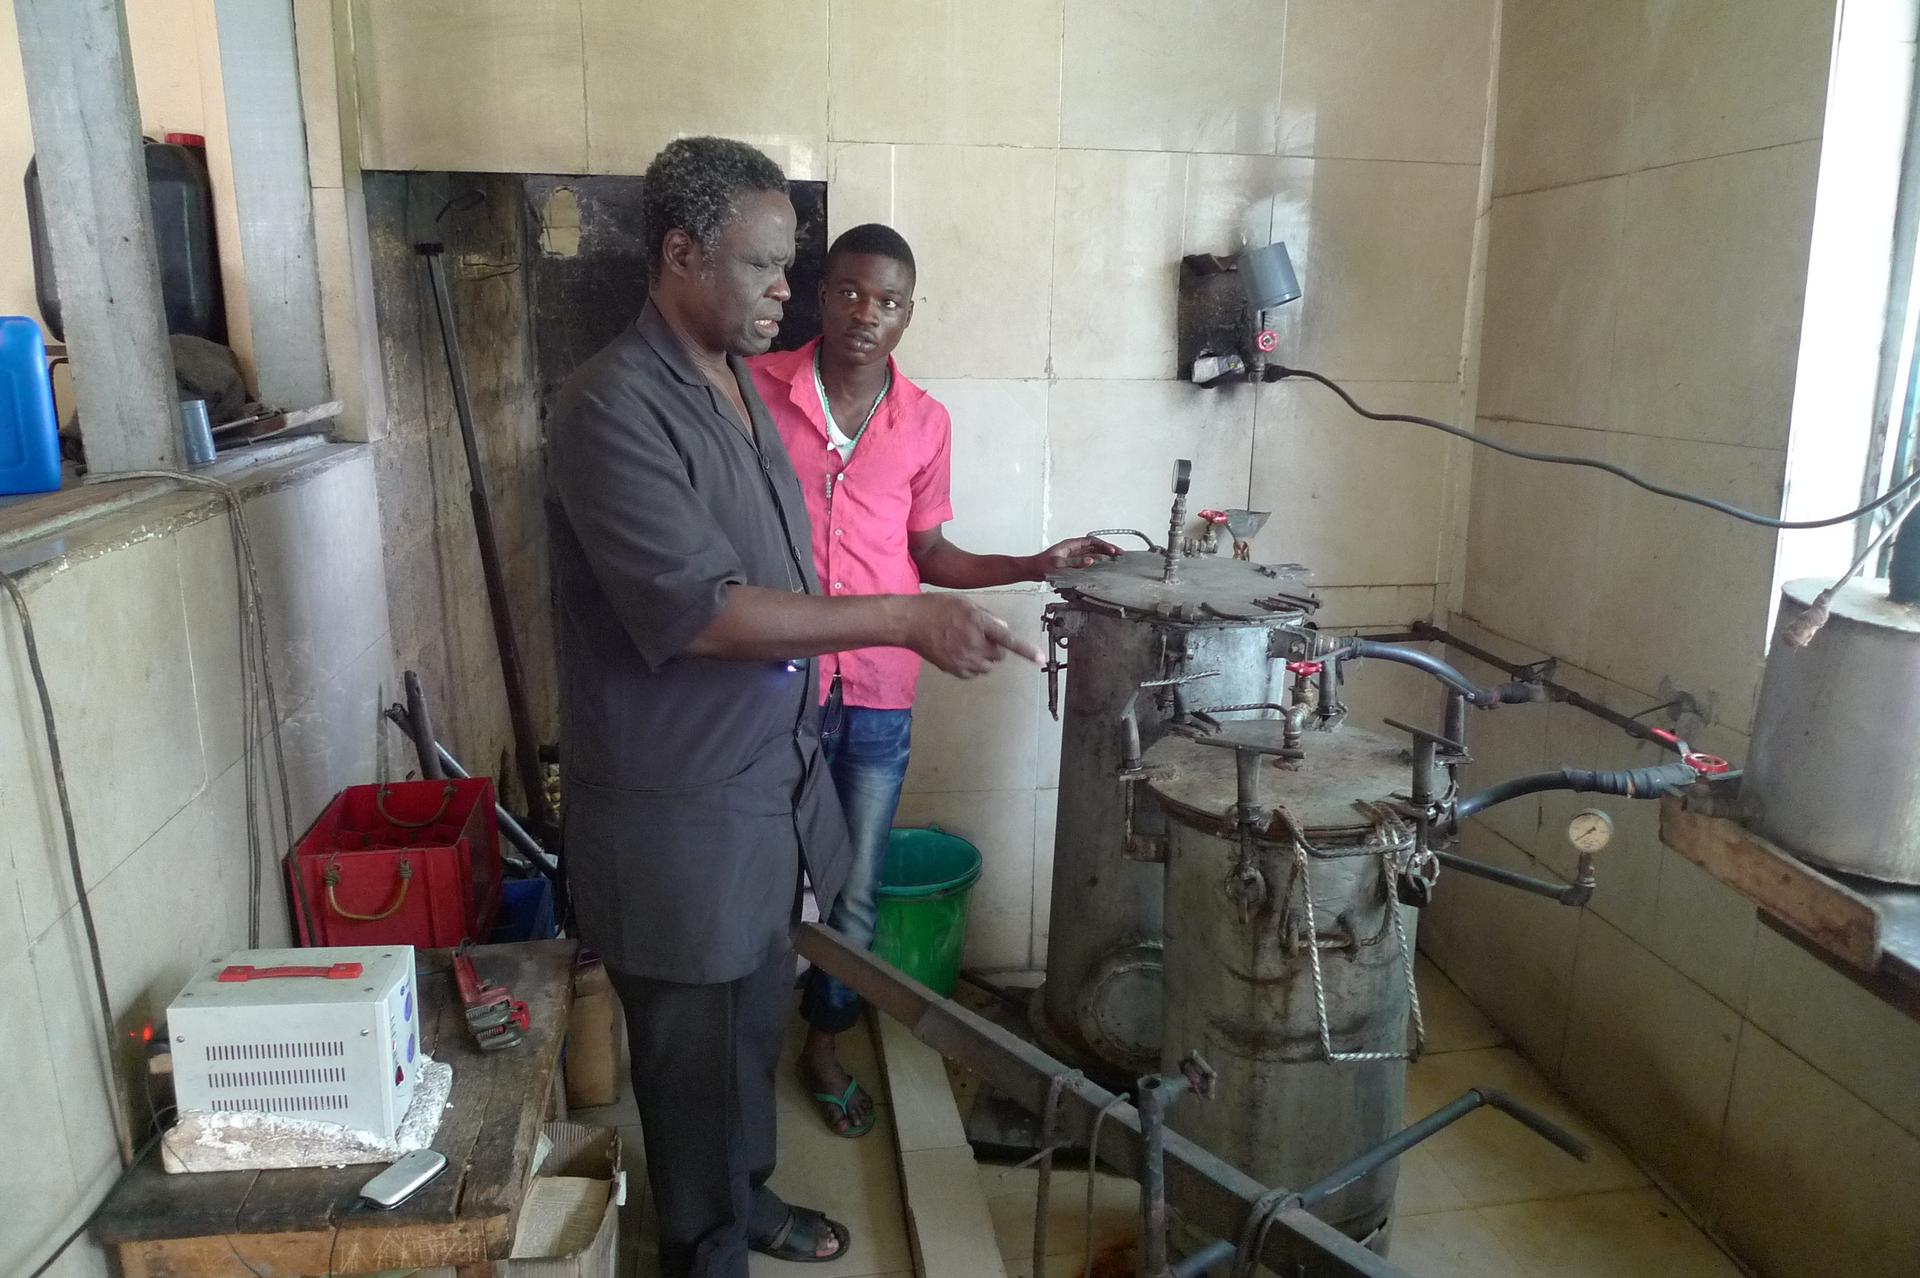 Dr. Oluyombo Awojobi inspects the autoclaves at his clinic in Eruwa, Nigeria. The autoclaves, which sterilize surgical equipment, are made from recycled propane cylinders.